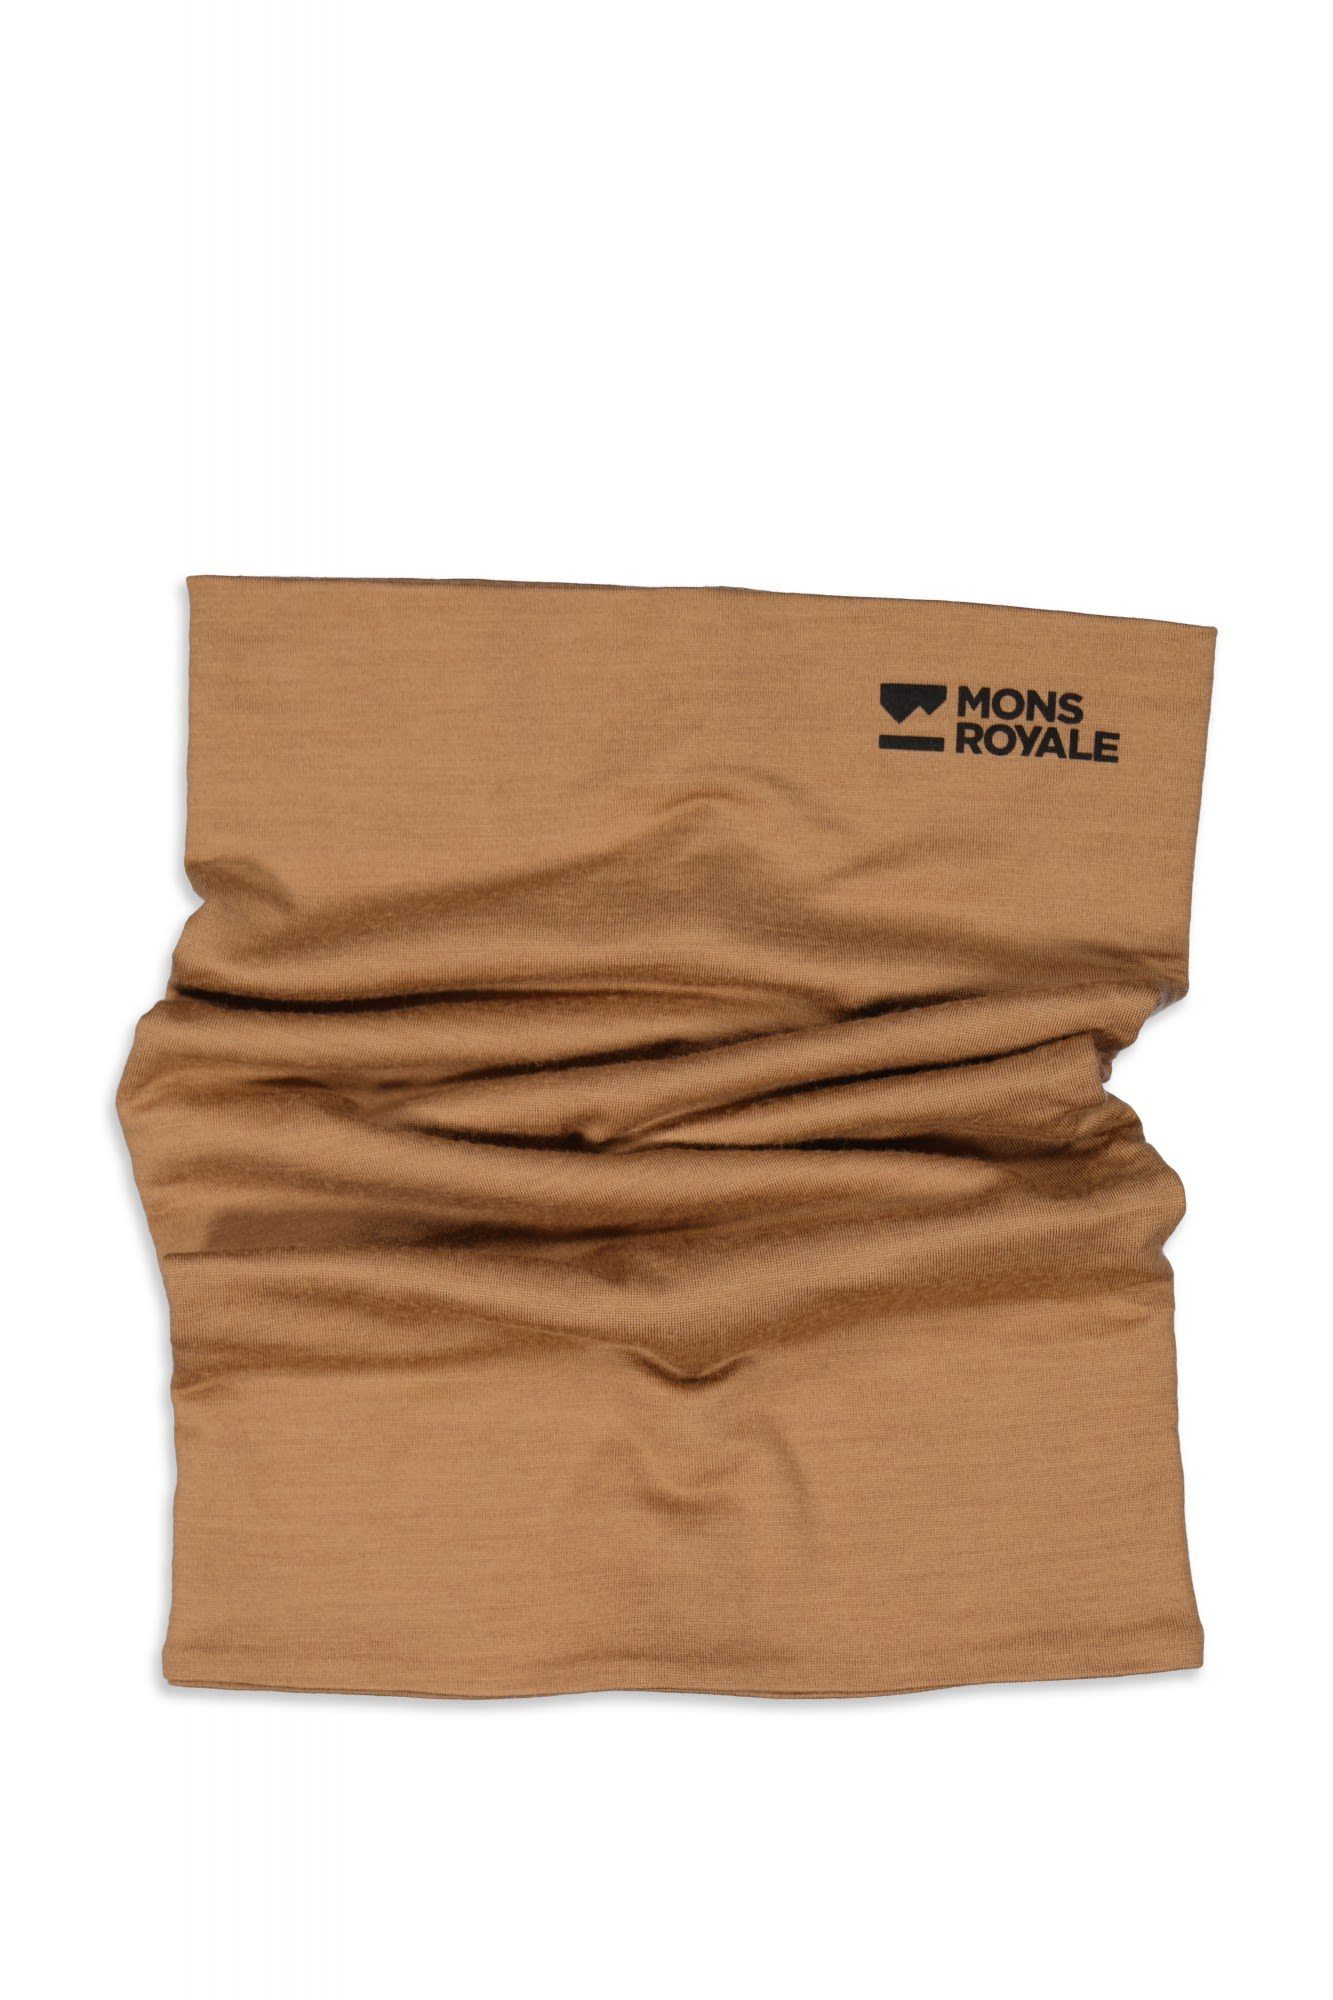 Mons Royale Schal Mons Royale Double Up Neckwarmer Accessoires Toffee